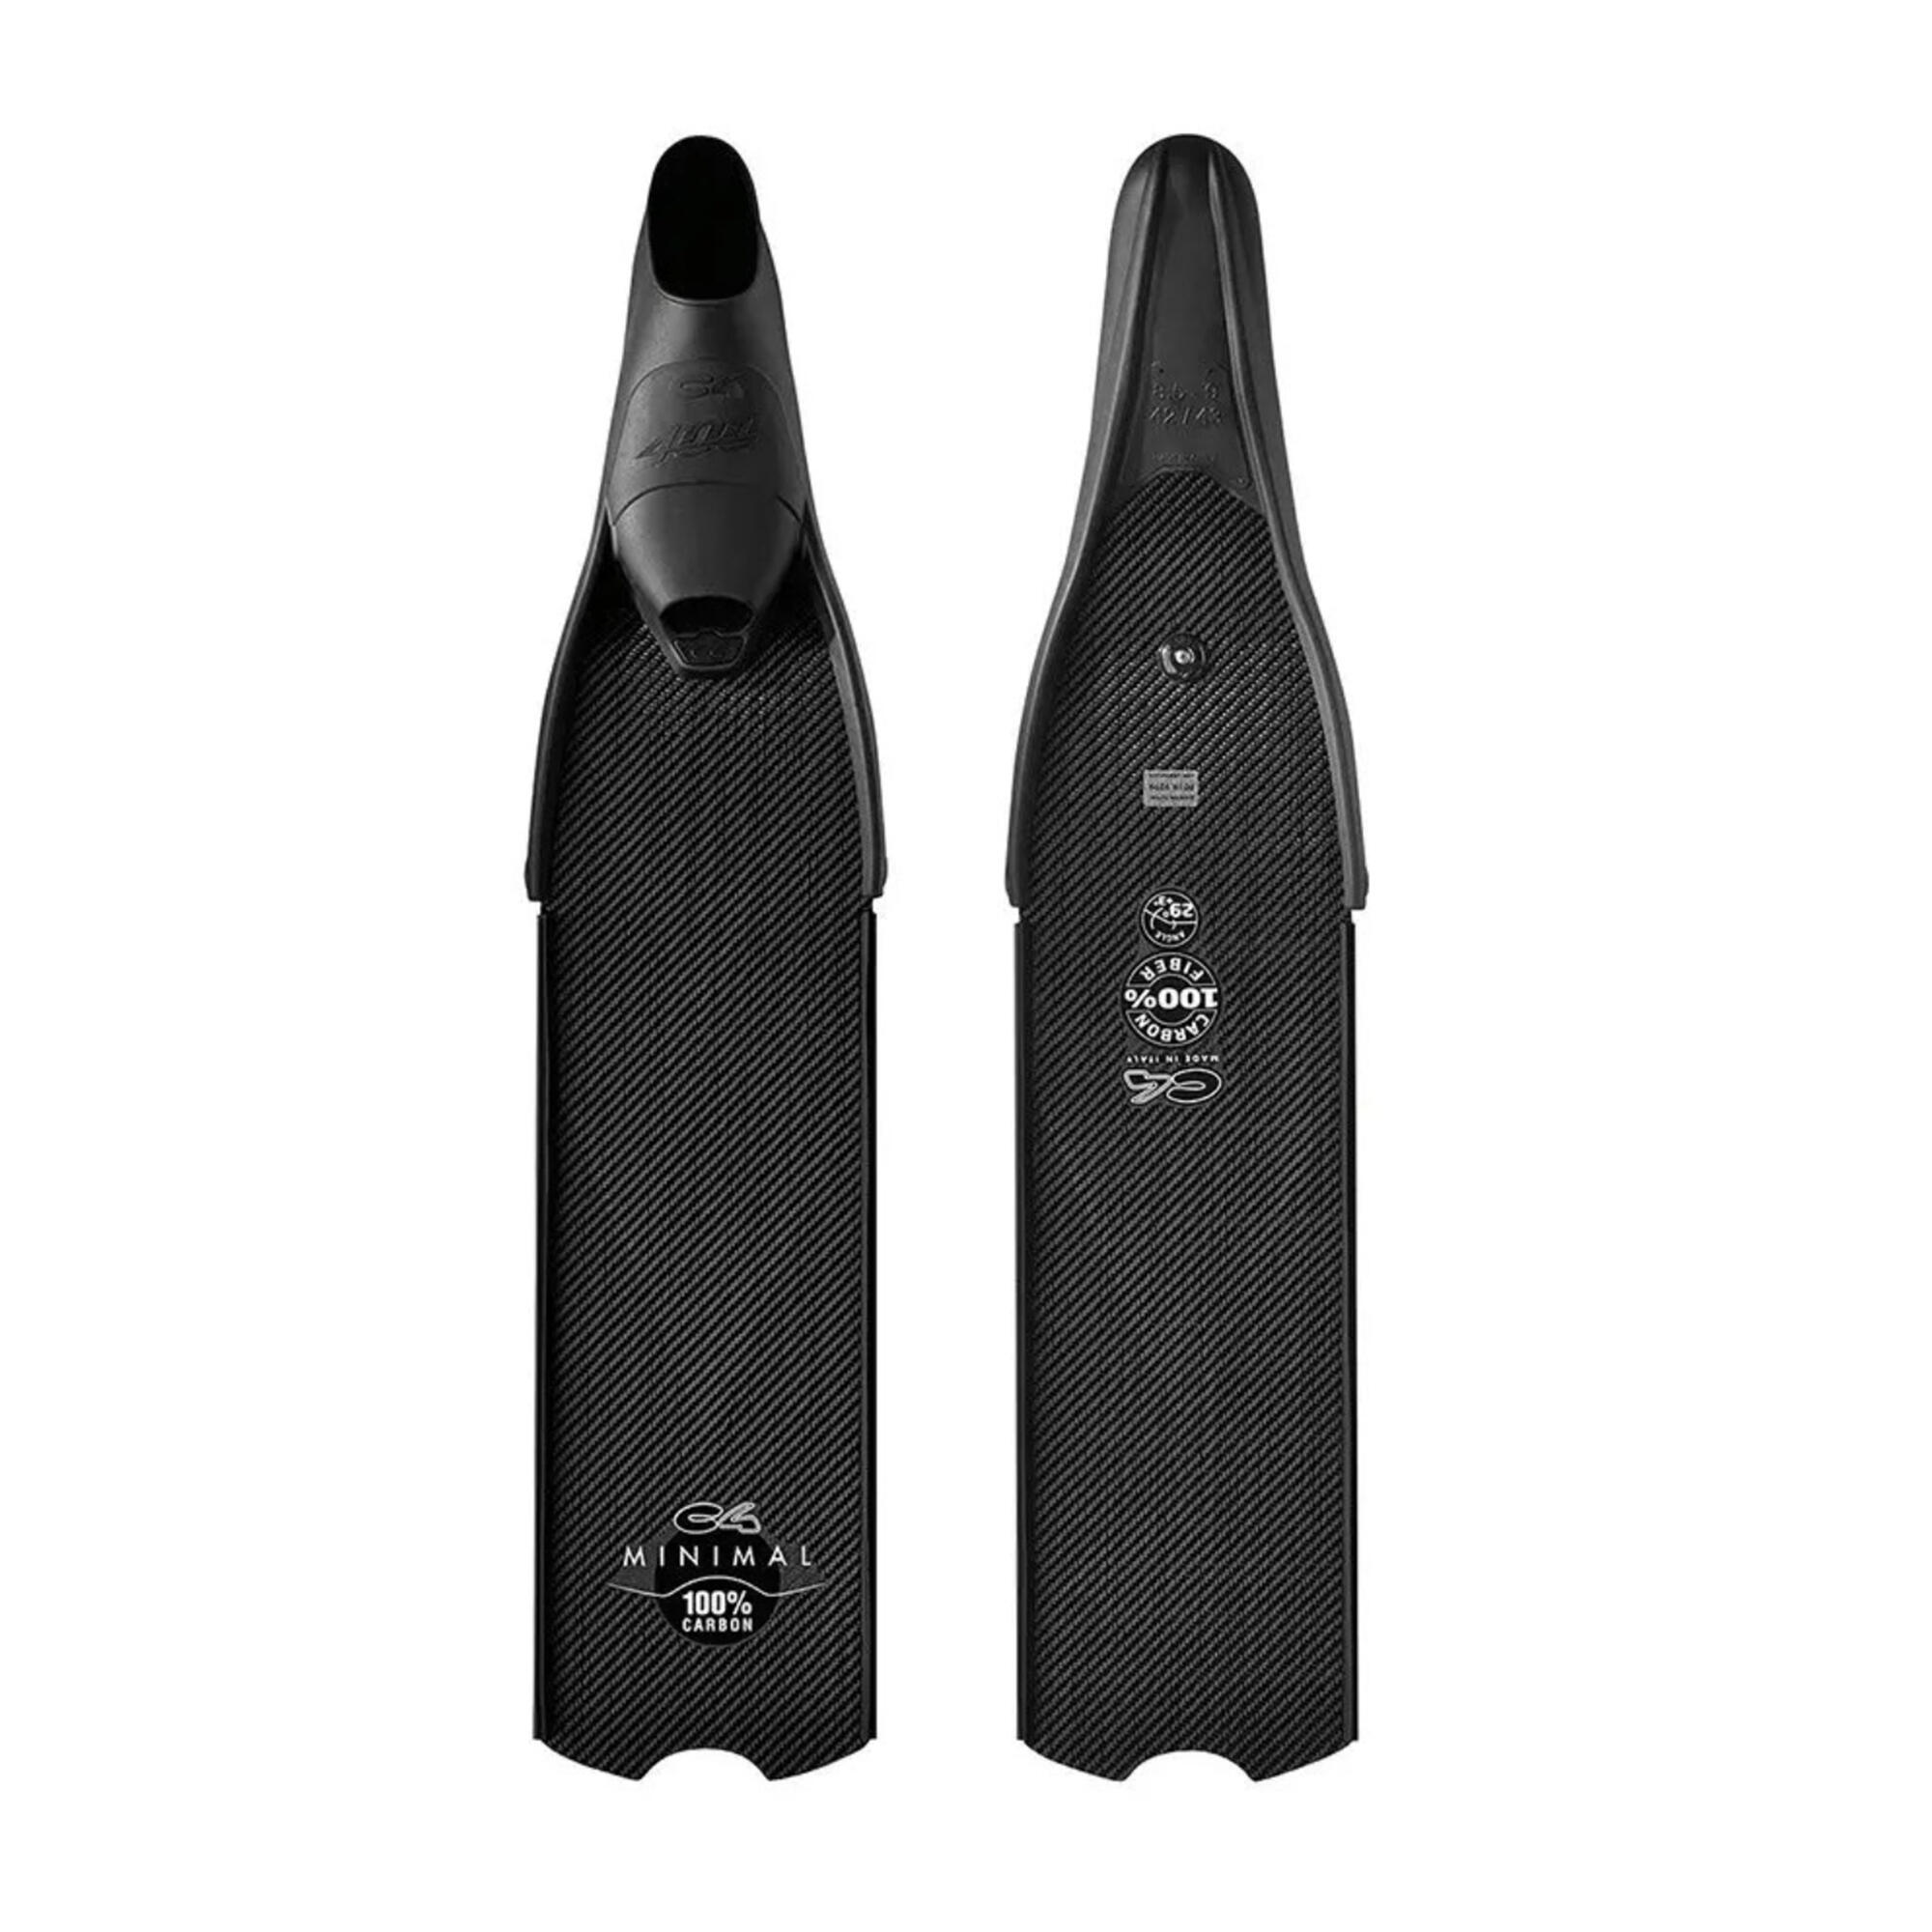 FREEDIVING AND SPEARFISHING FINS C4 CARBON MINIMAL 100% CARBON 4/6